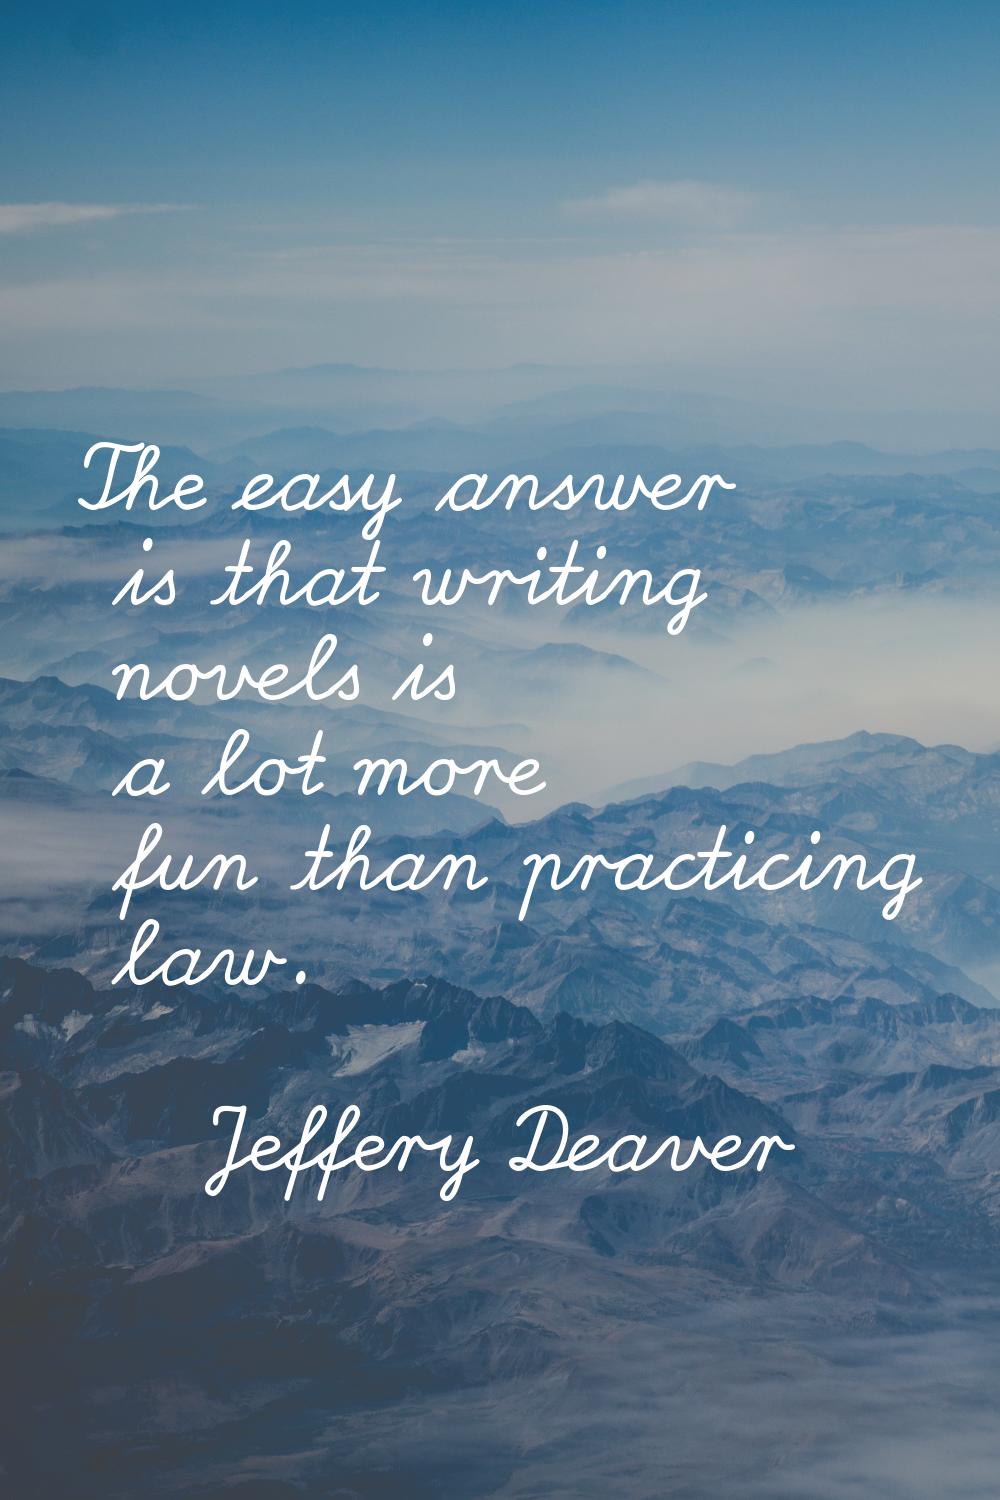 The easy answer is that writing novels is a lot more fun than practicing law.